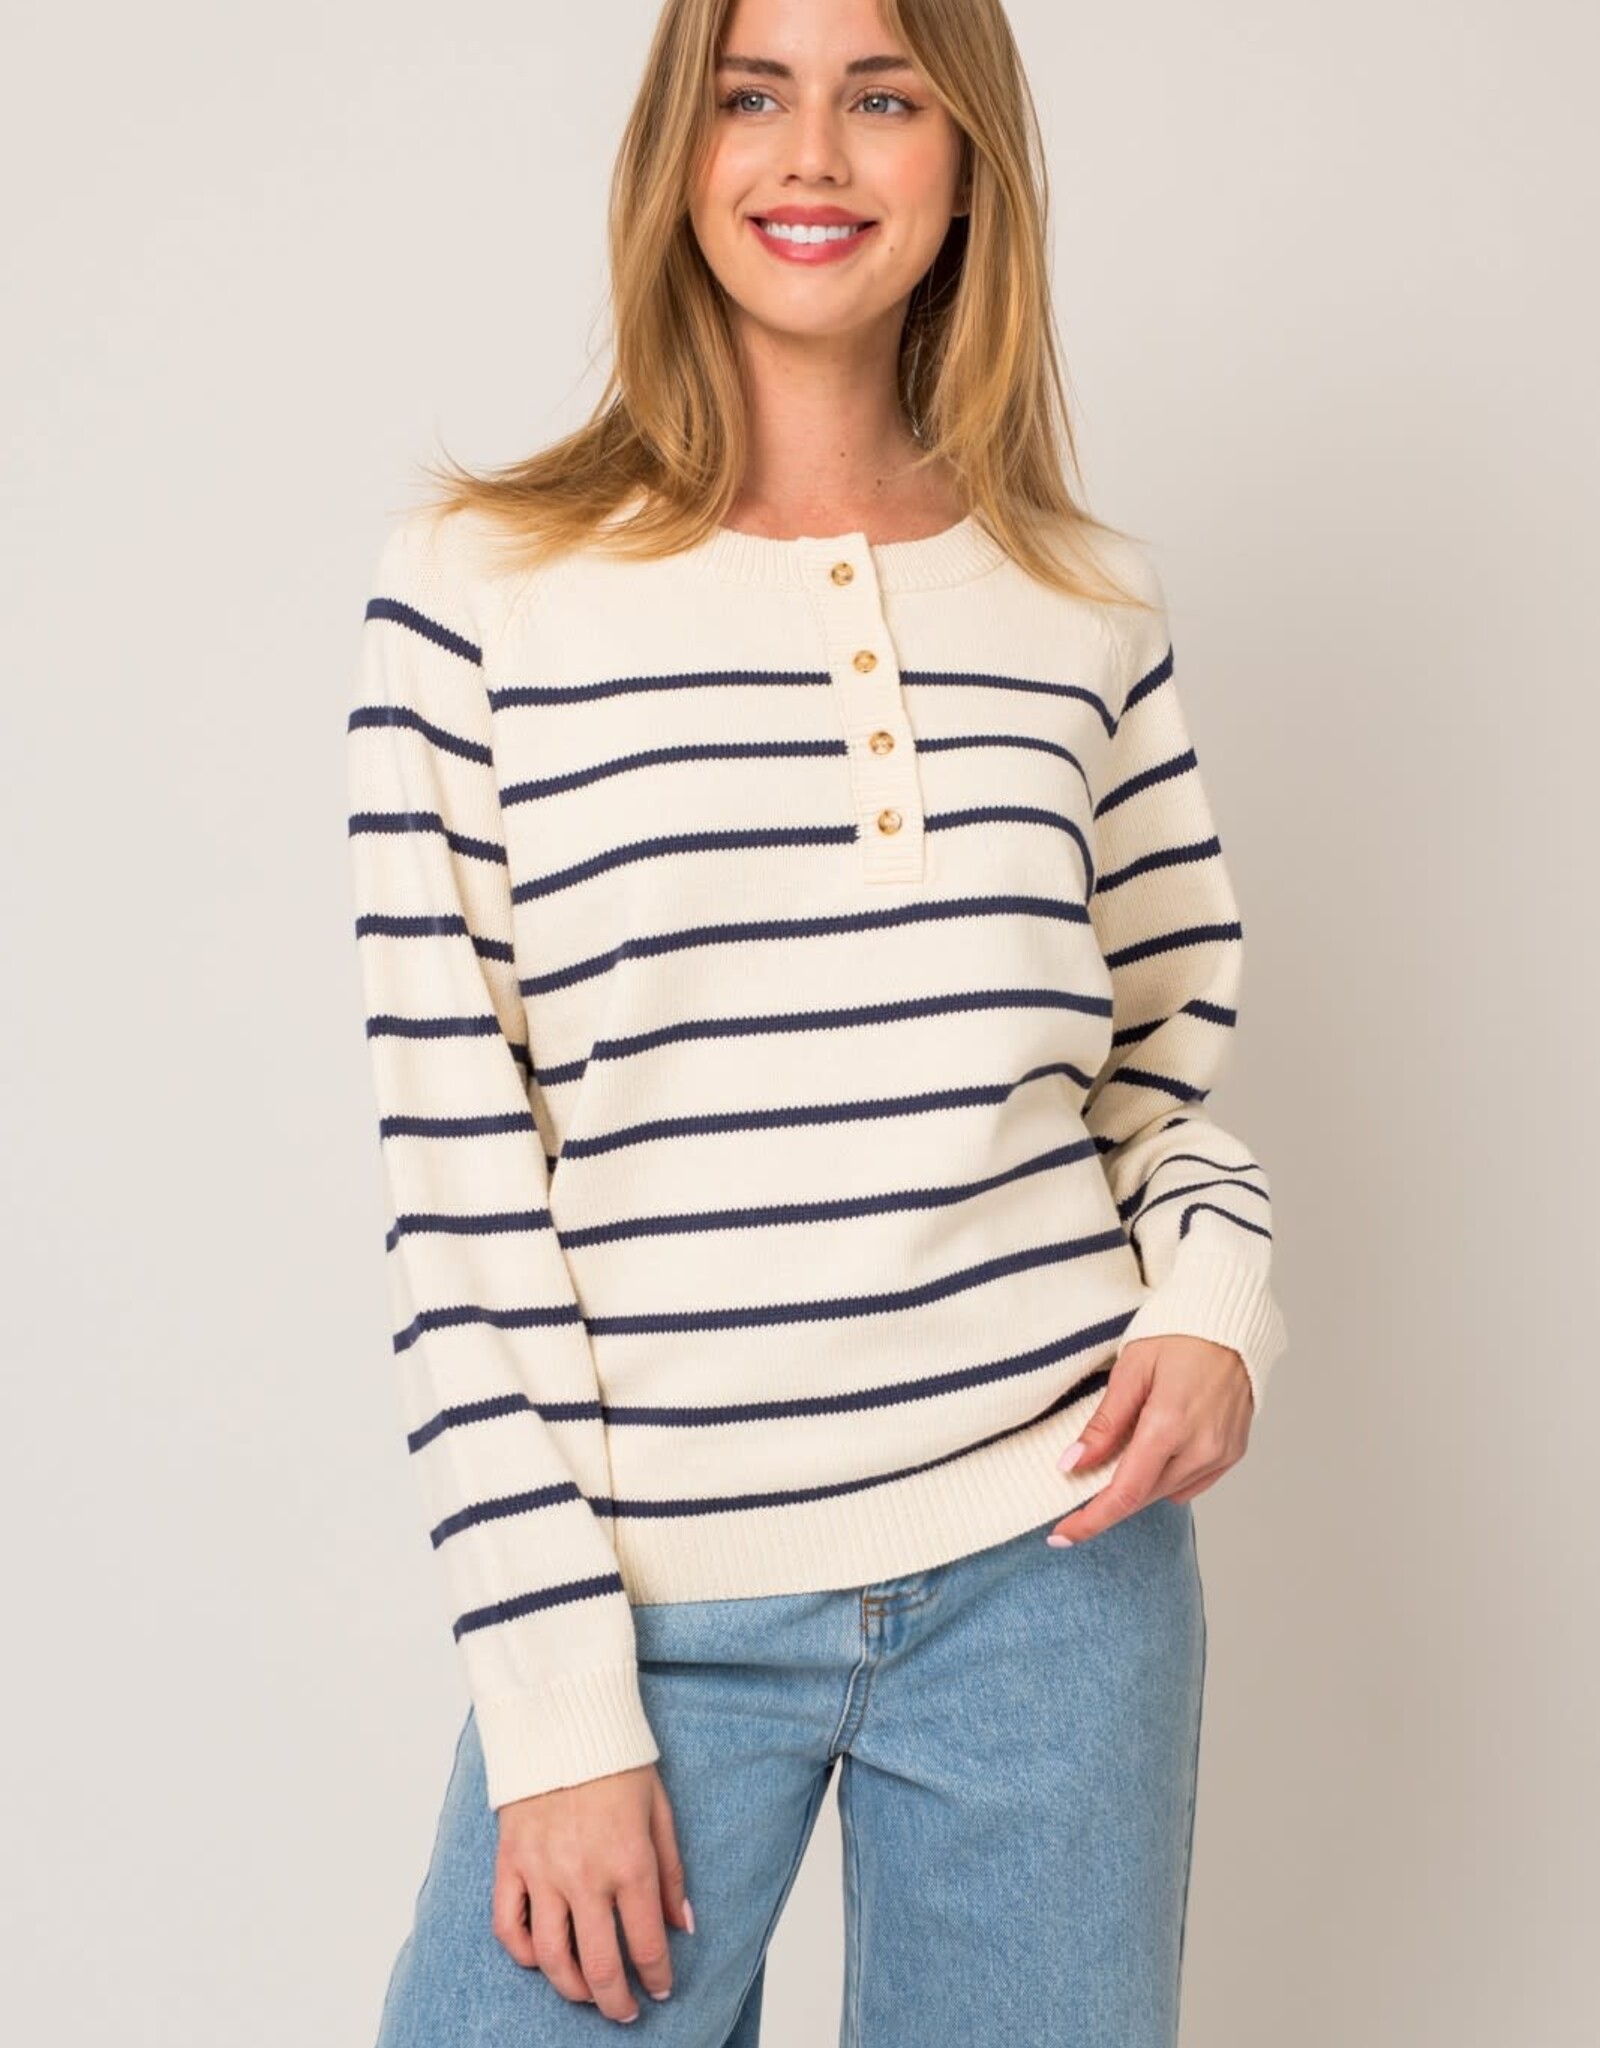 Miss Bliss Striped Half Button Boat Neck Sweater- Cream & Navy